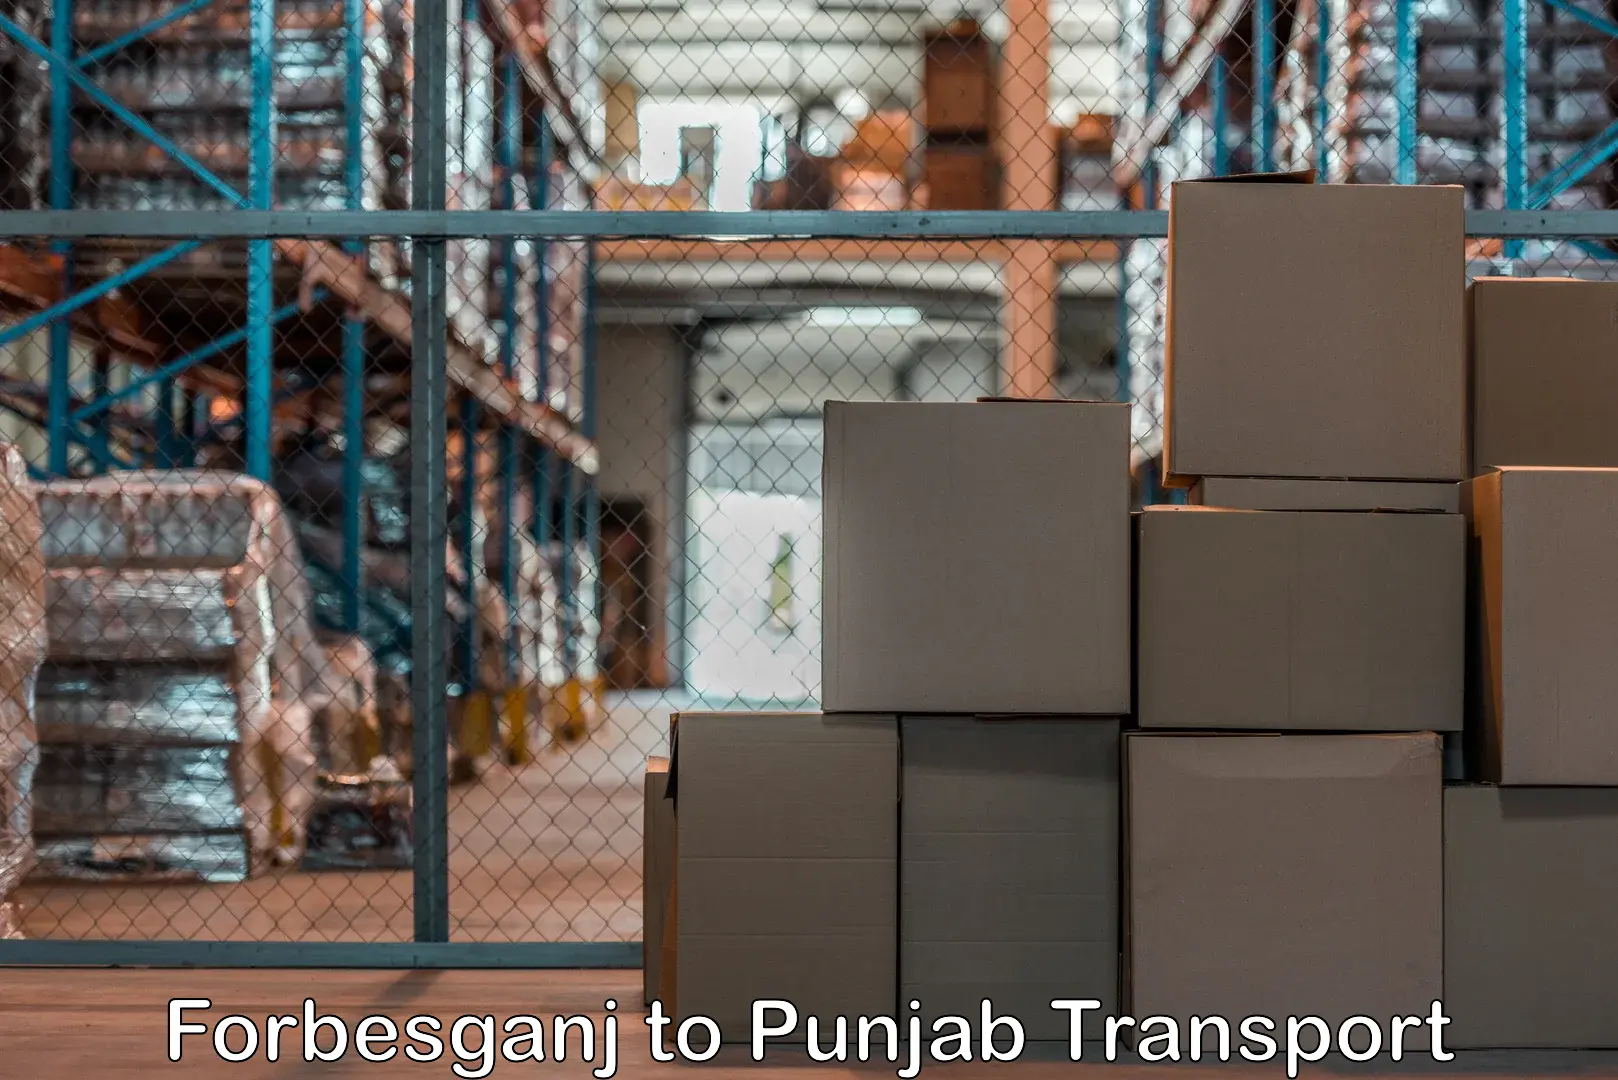 Daily parcel service transport Forbesganj to Mohali